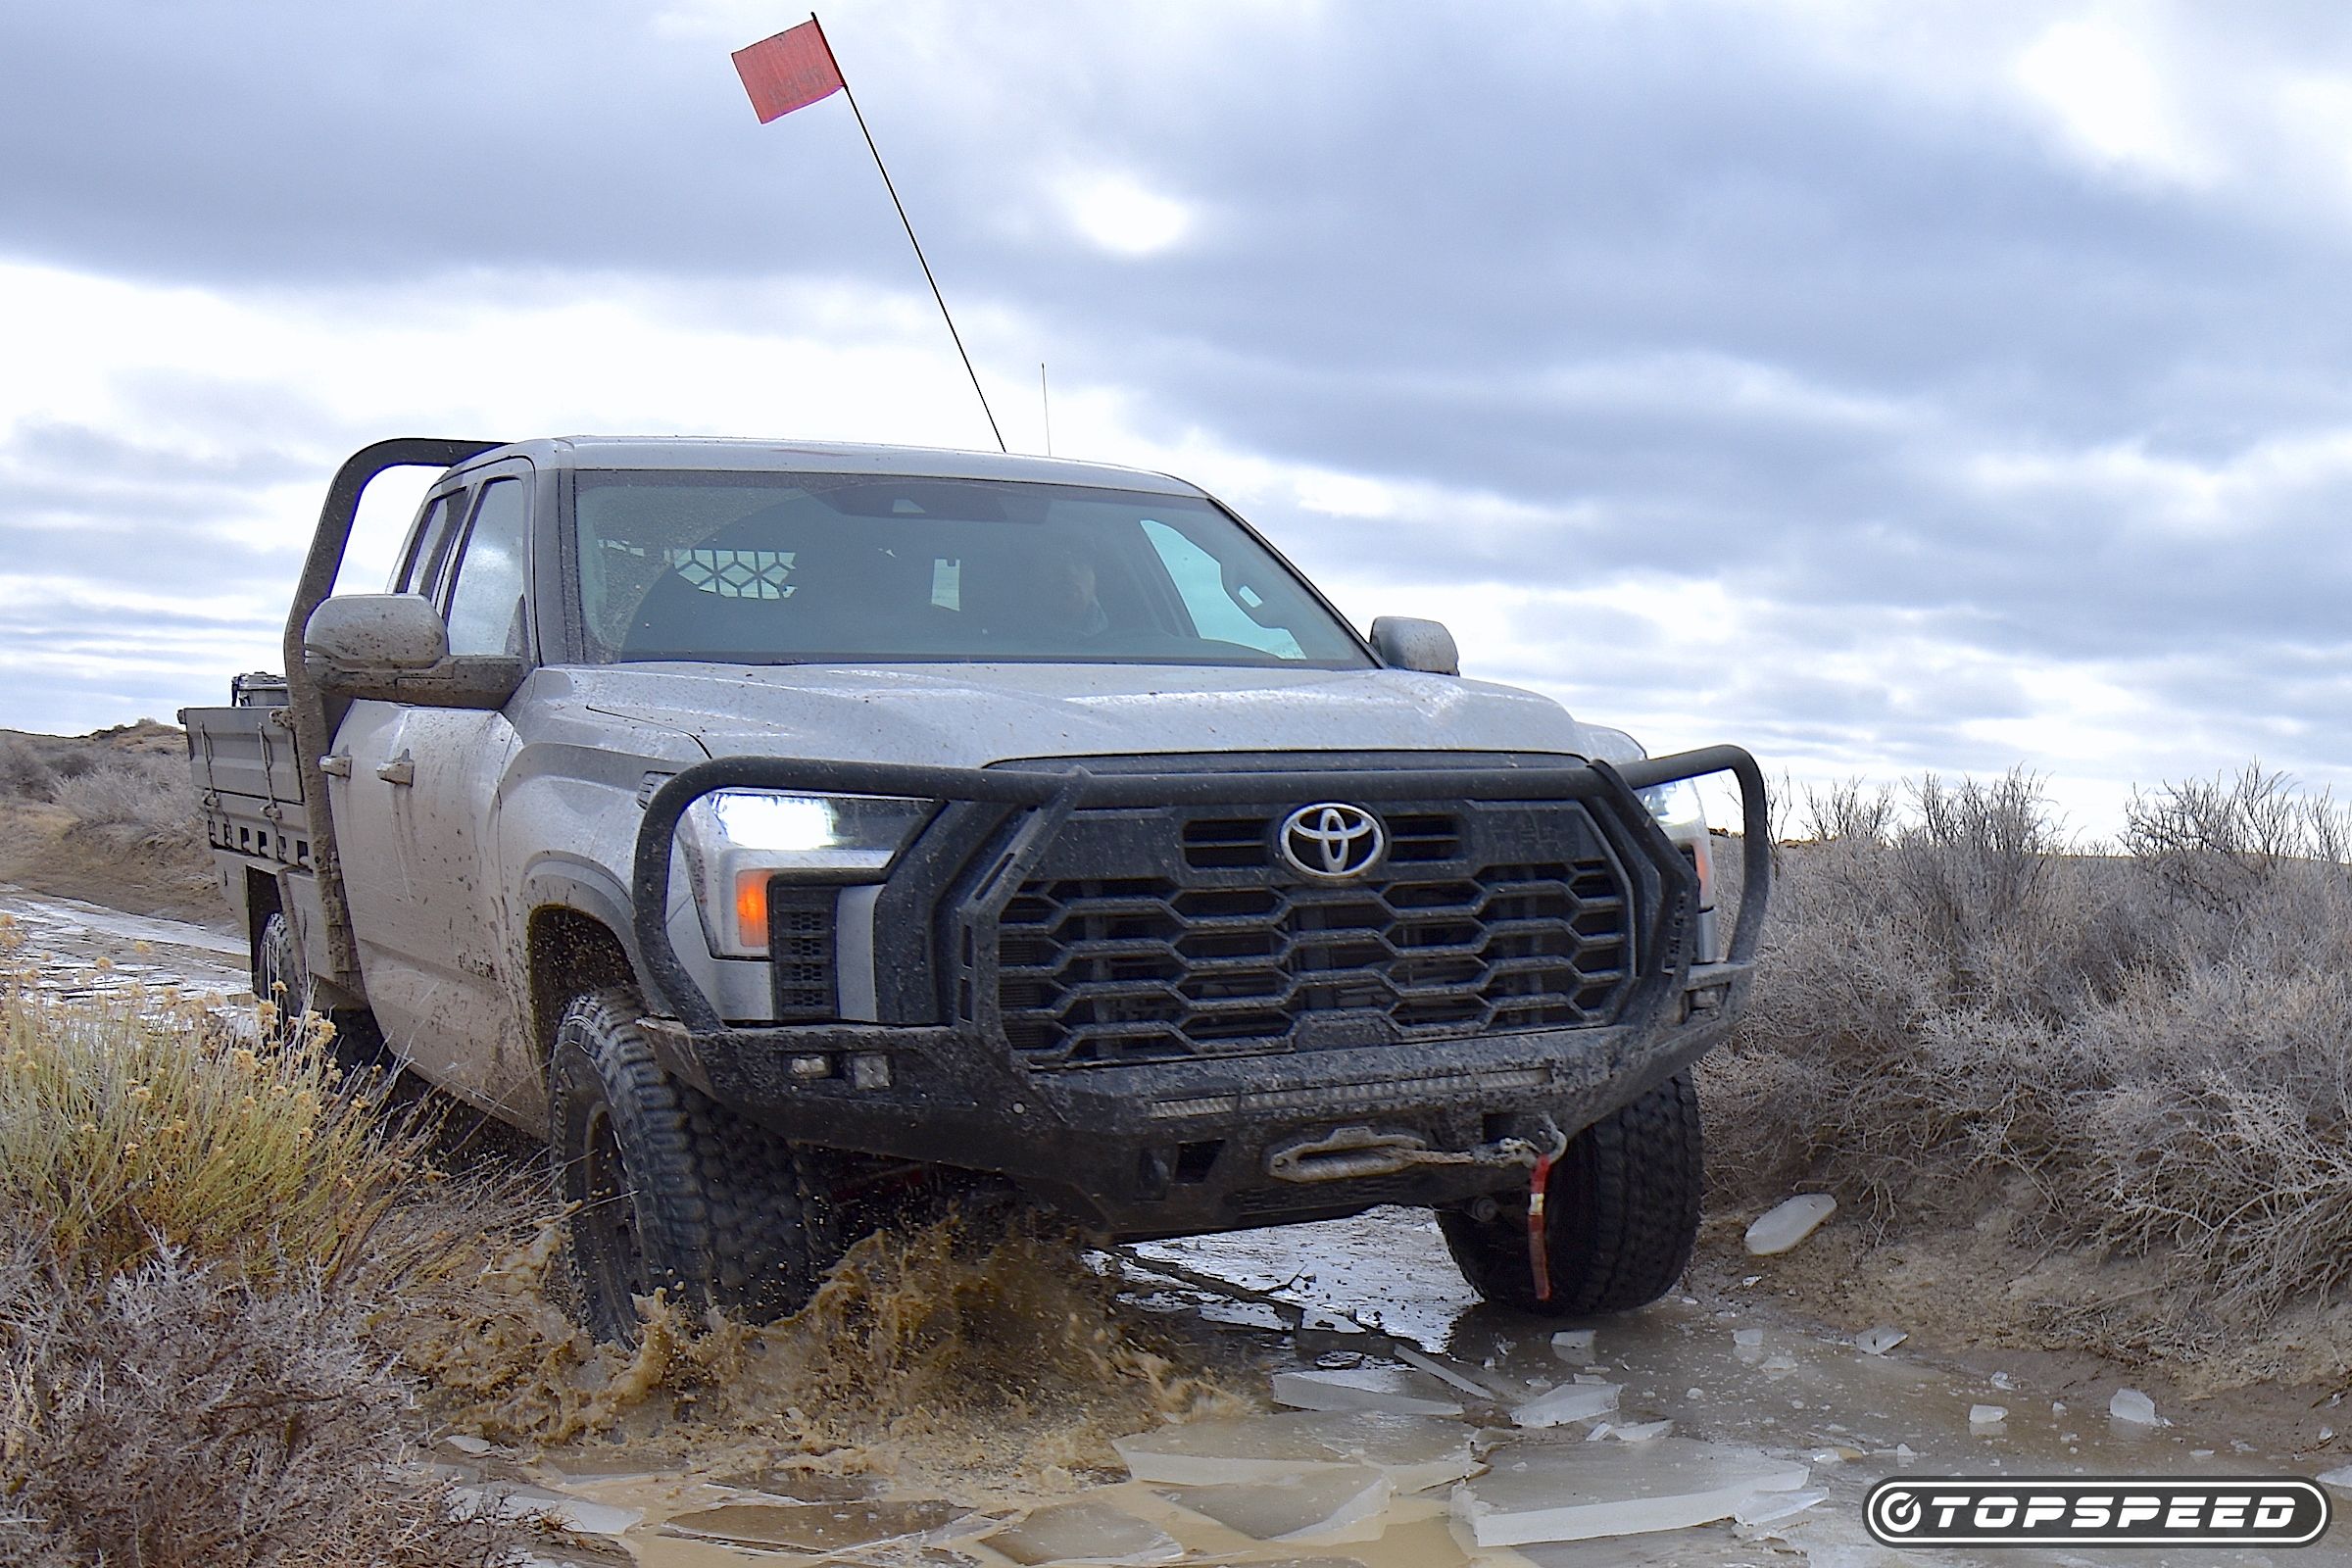 The Firestone Destination XT tires making light work of the ice and mud.